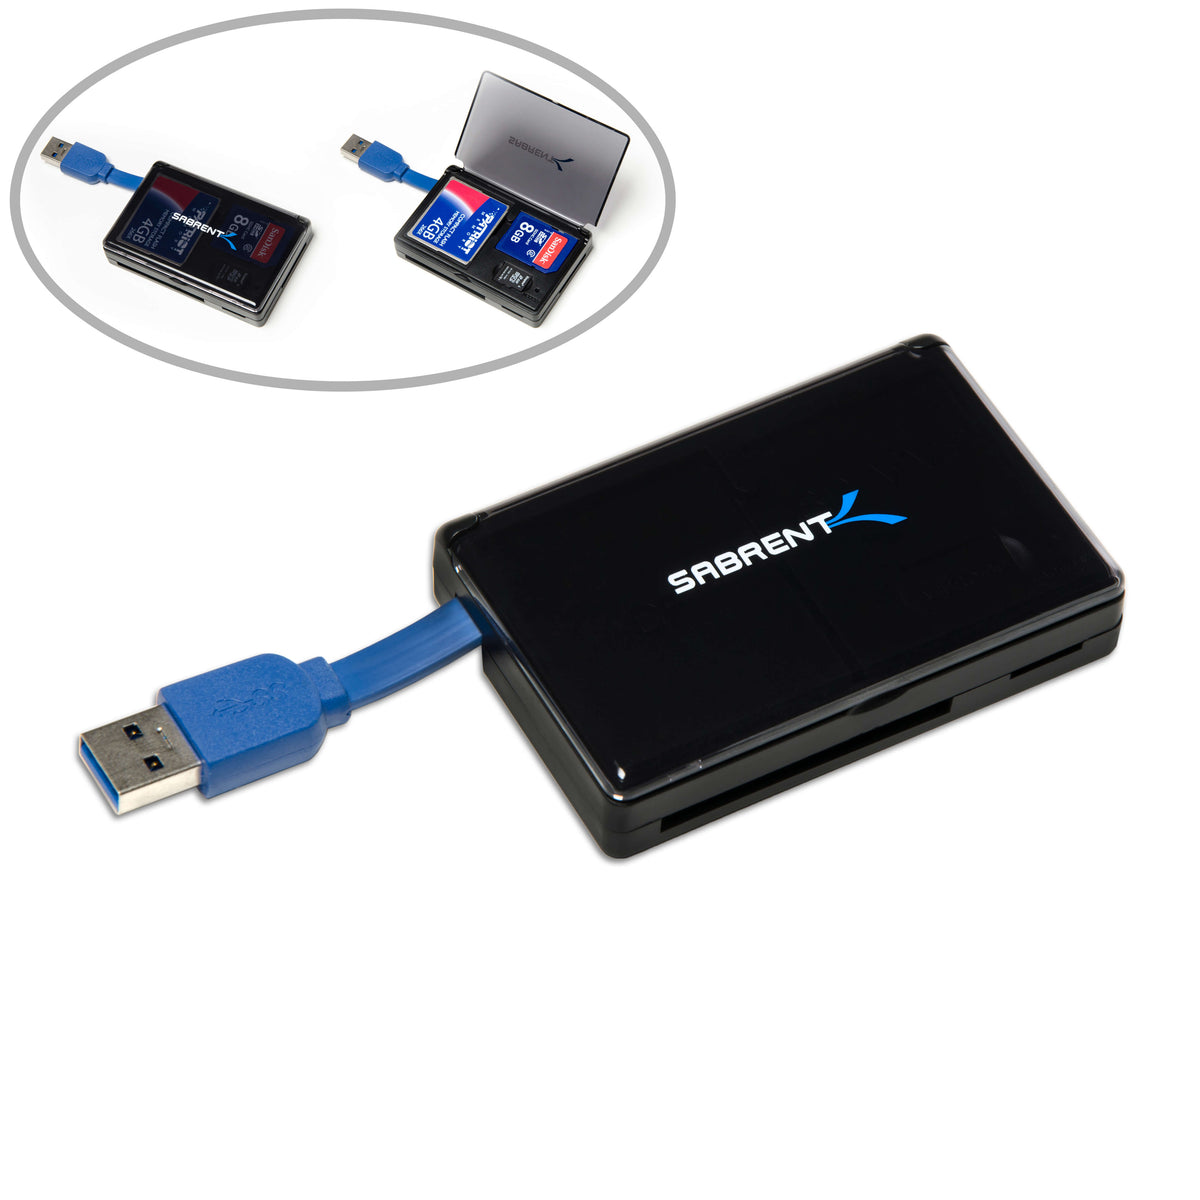 3 Slot USB 3.0 SuperSpeed Memory Card Reader with Card Storage Box